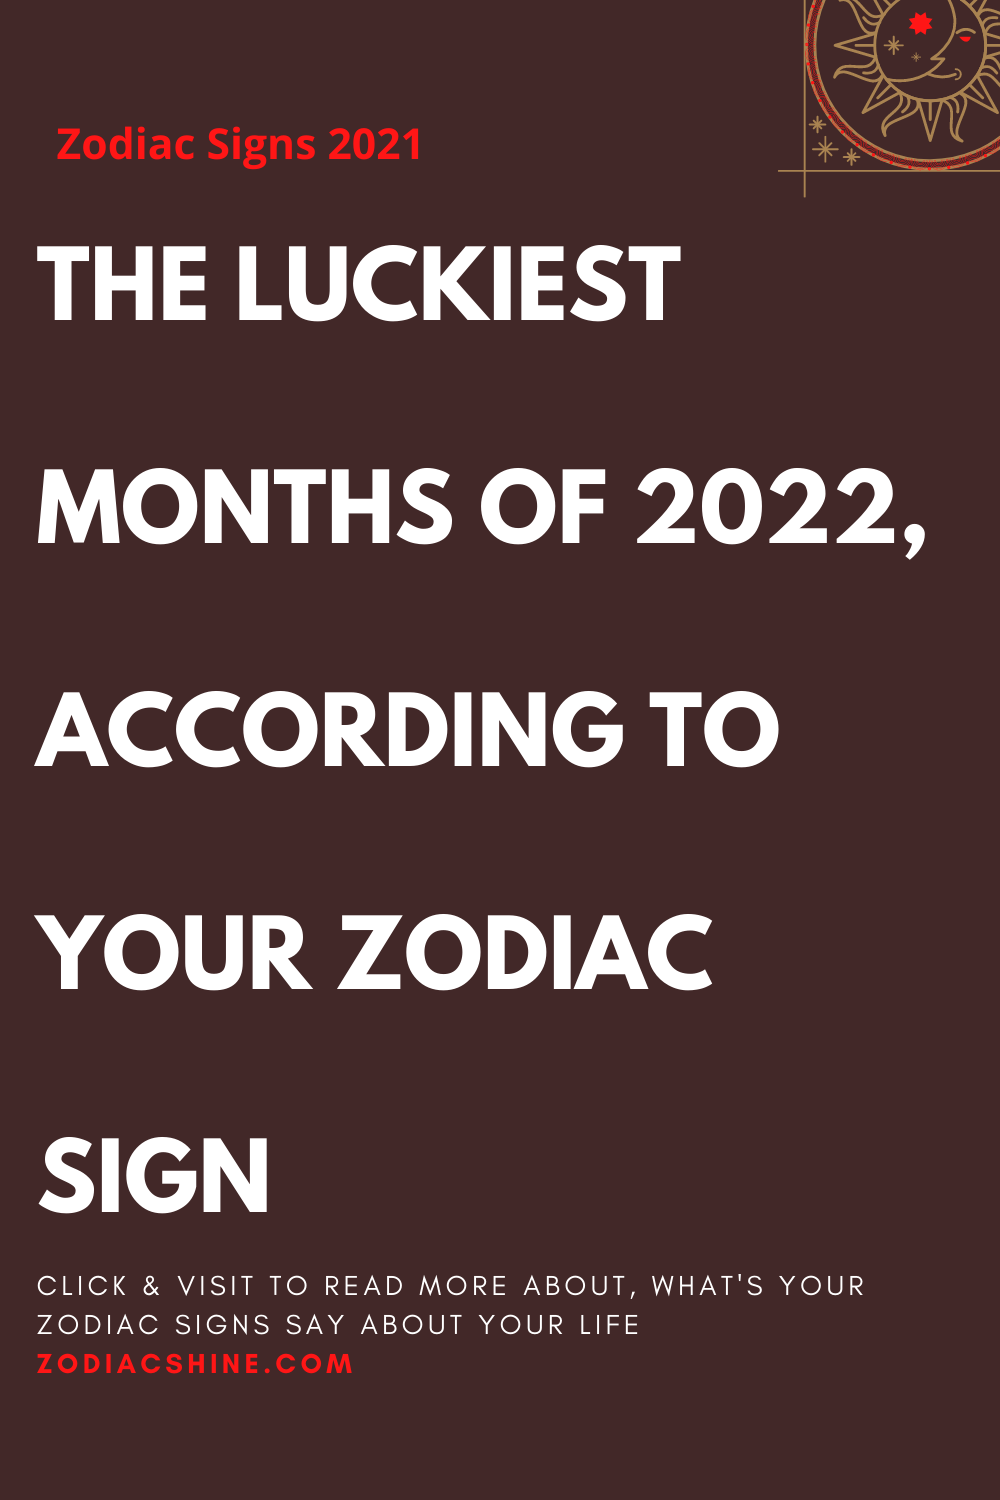 THE LUCKIEST MONTHS OF 2022, ACCORDING TO YOUR ZODIAC SIGN